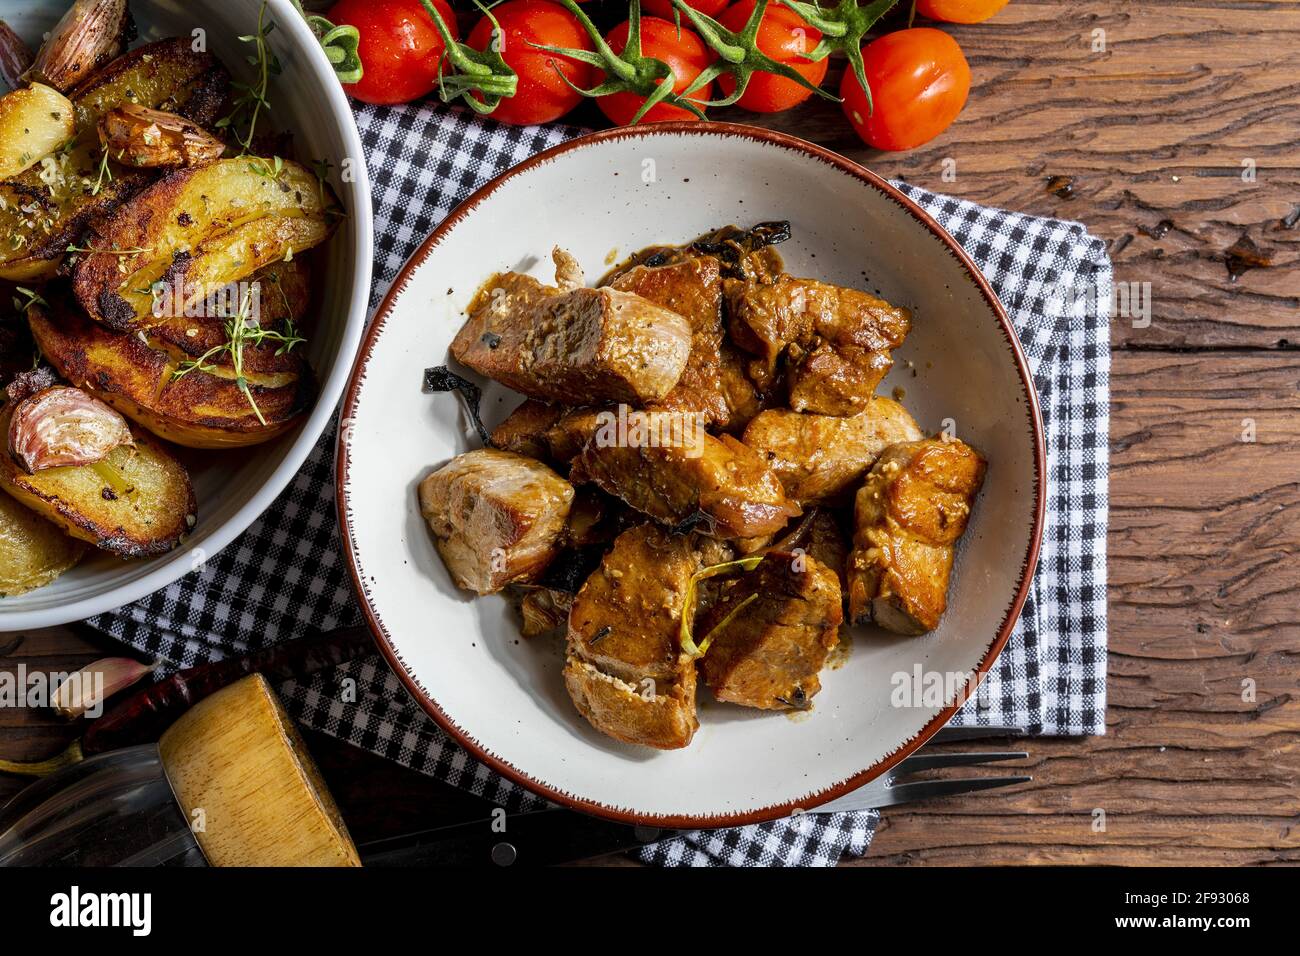 Appetizing stew of pork tenderloin meat cooked in the wok, cut into cubes. With roasted and golden potatoes, garlic, salt, oregano and fresh tomatoes. Stock Photo